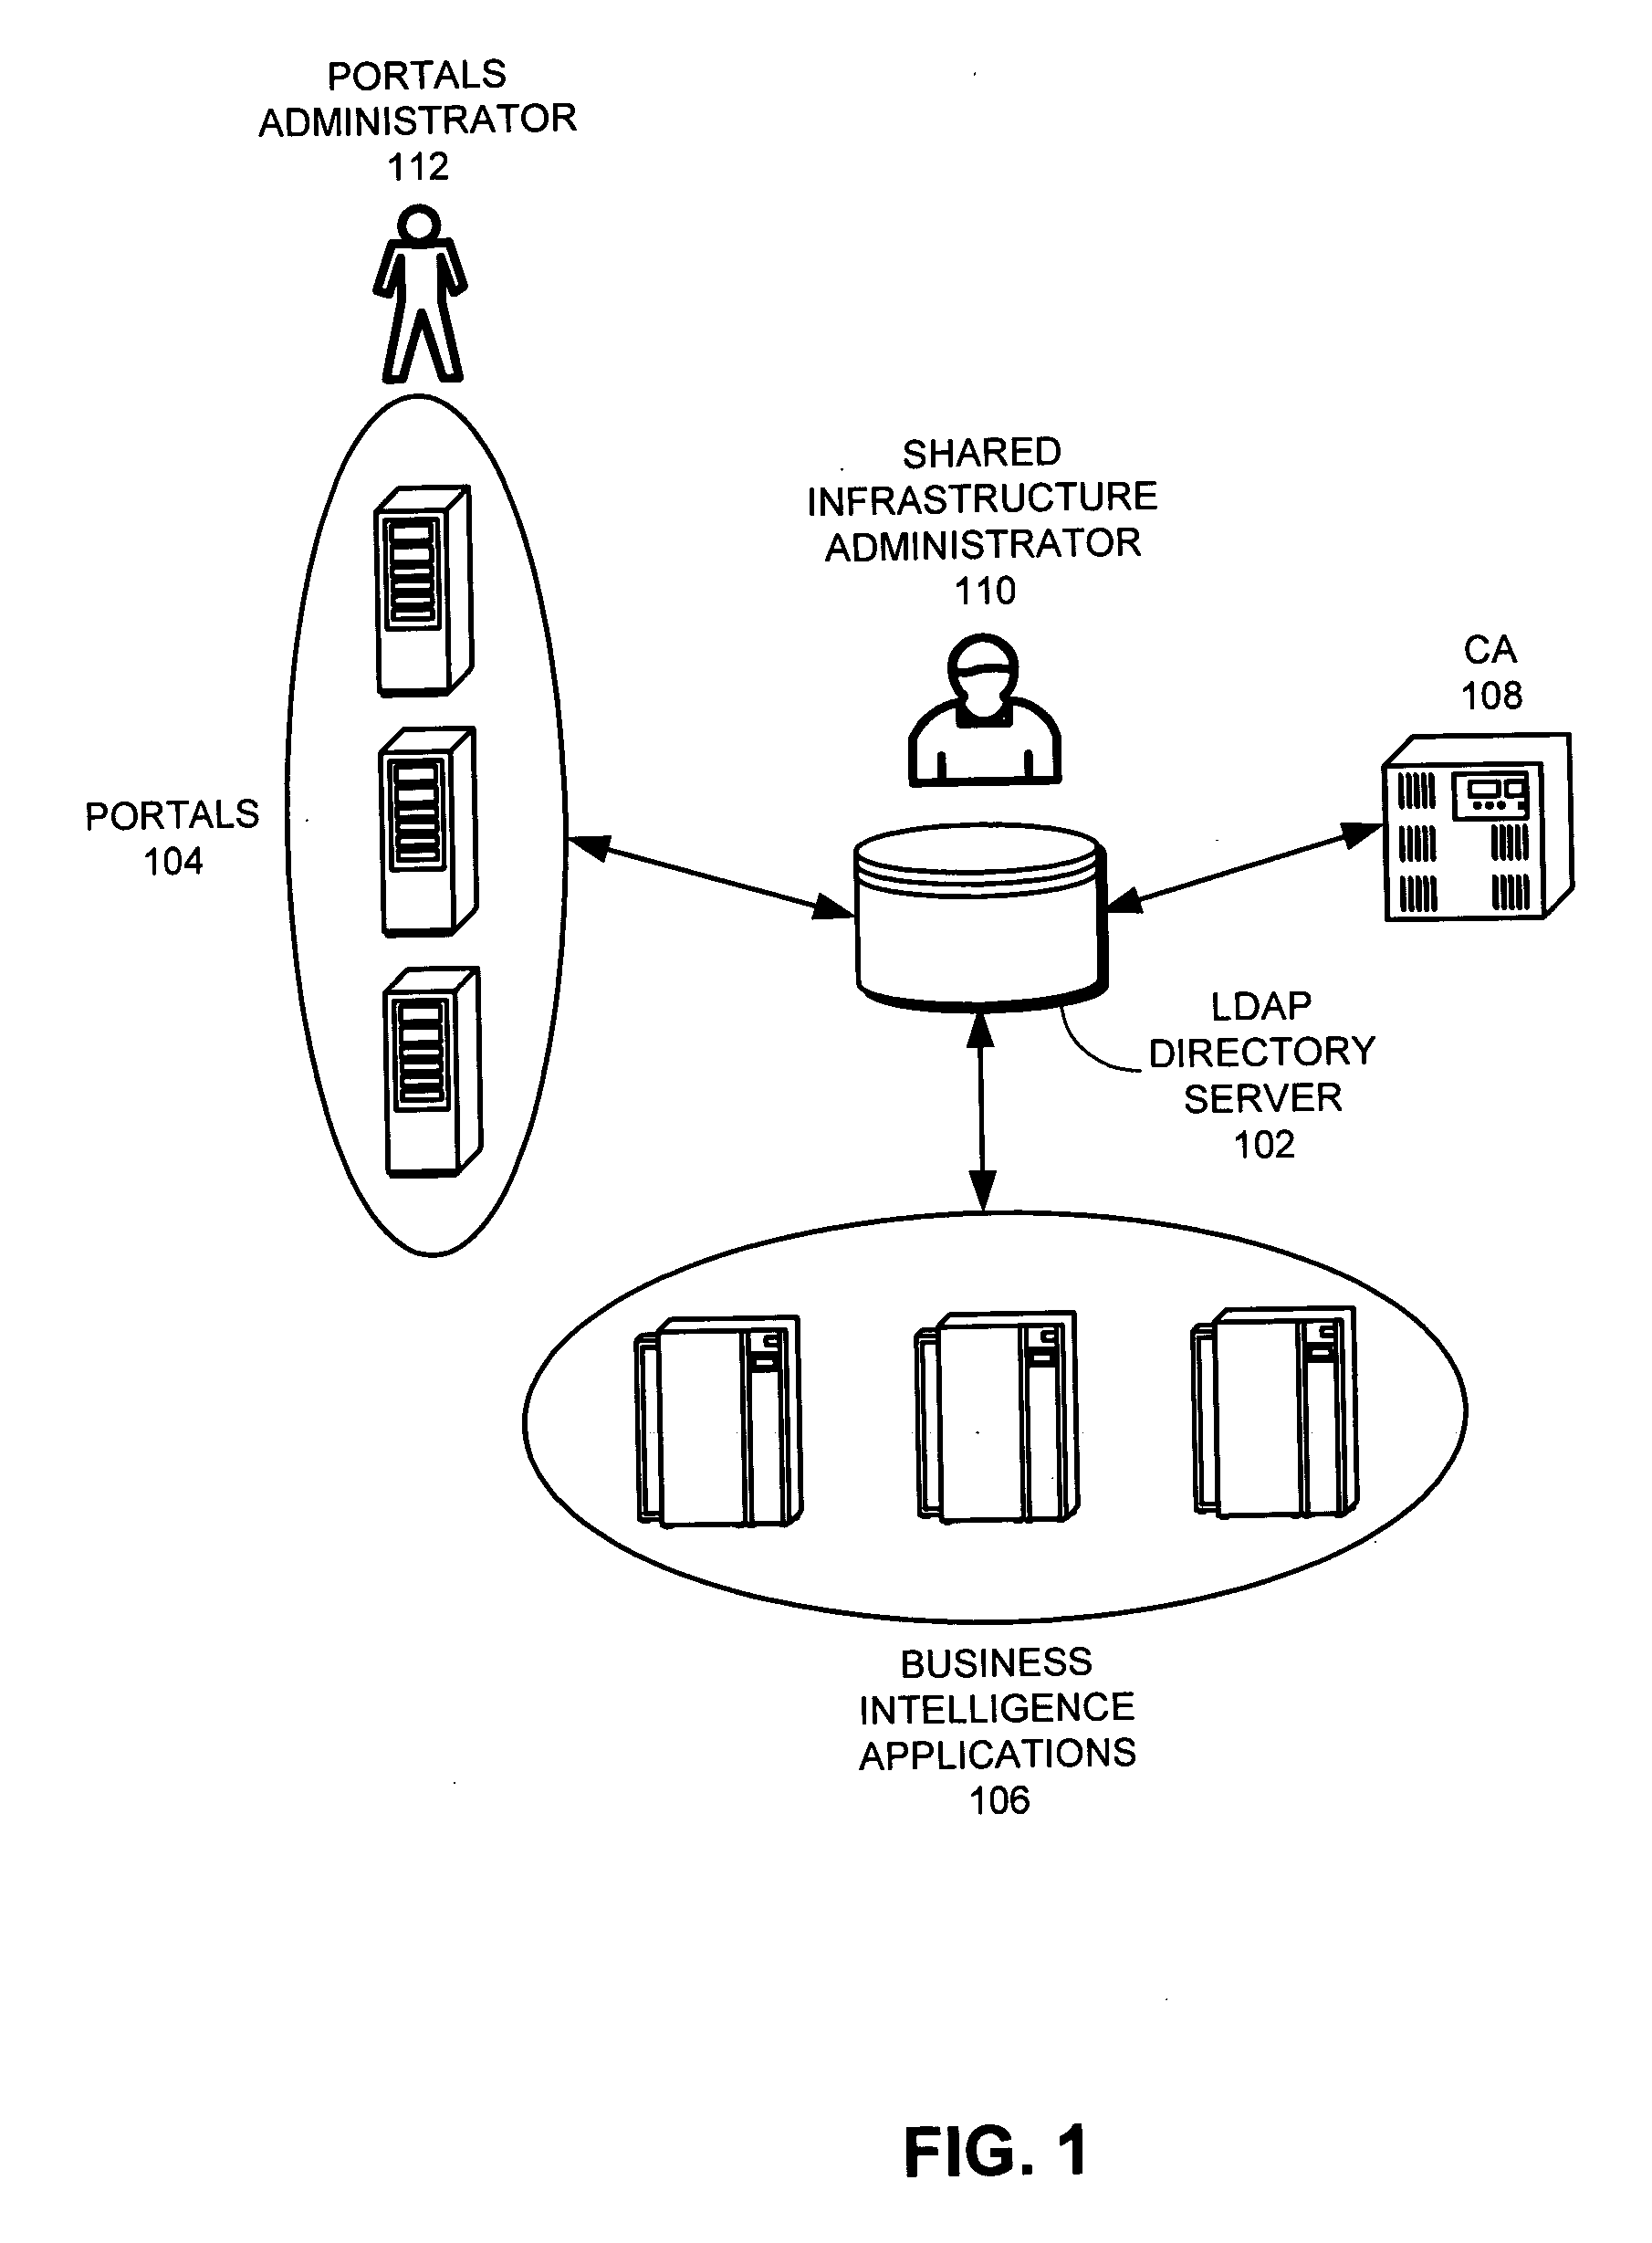 Method and apparatus for securely deploying and managing applications in a distributed computing infrastructure